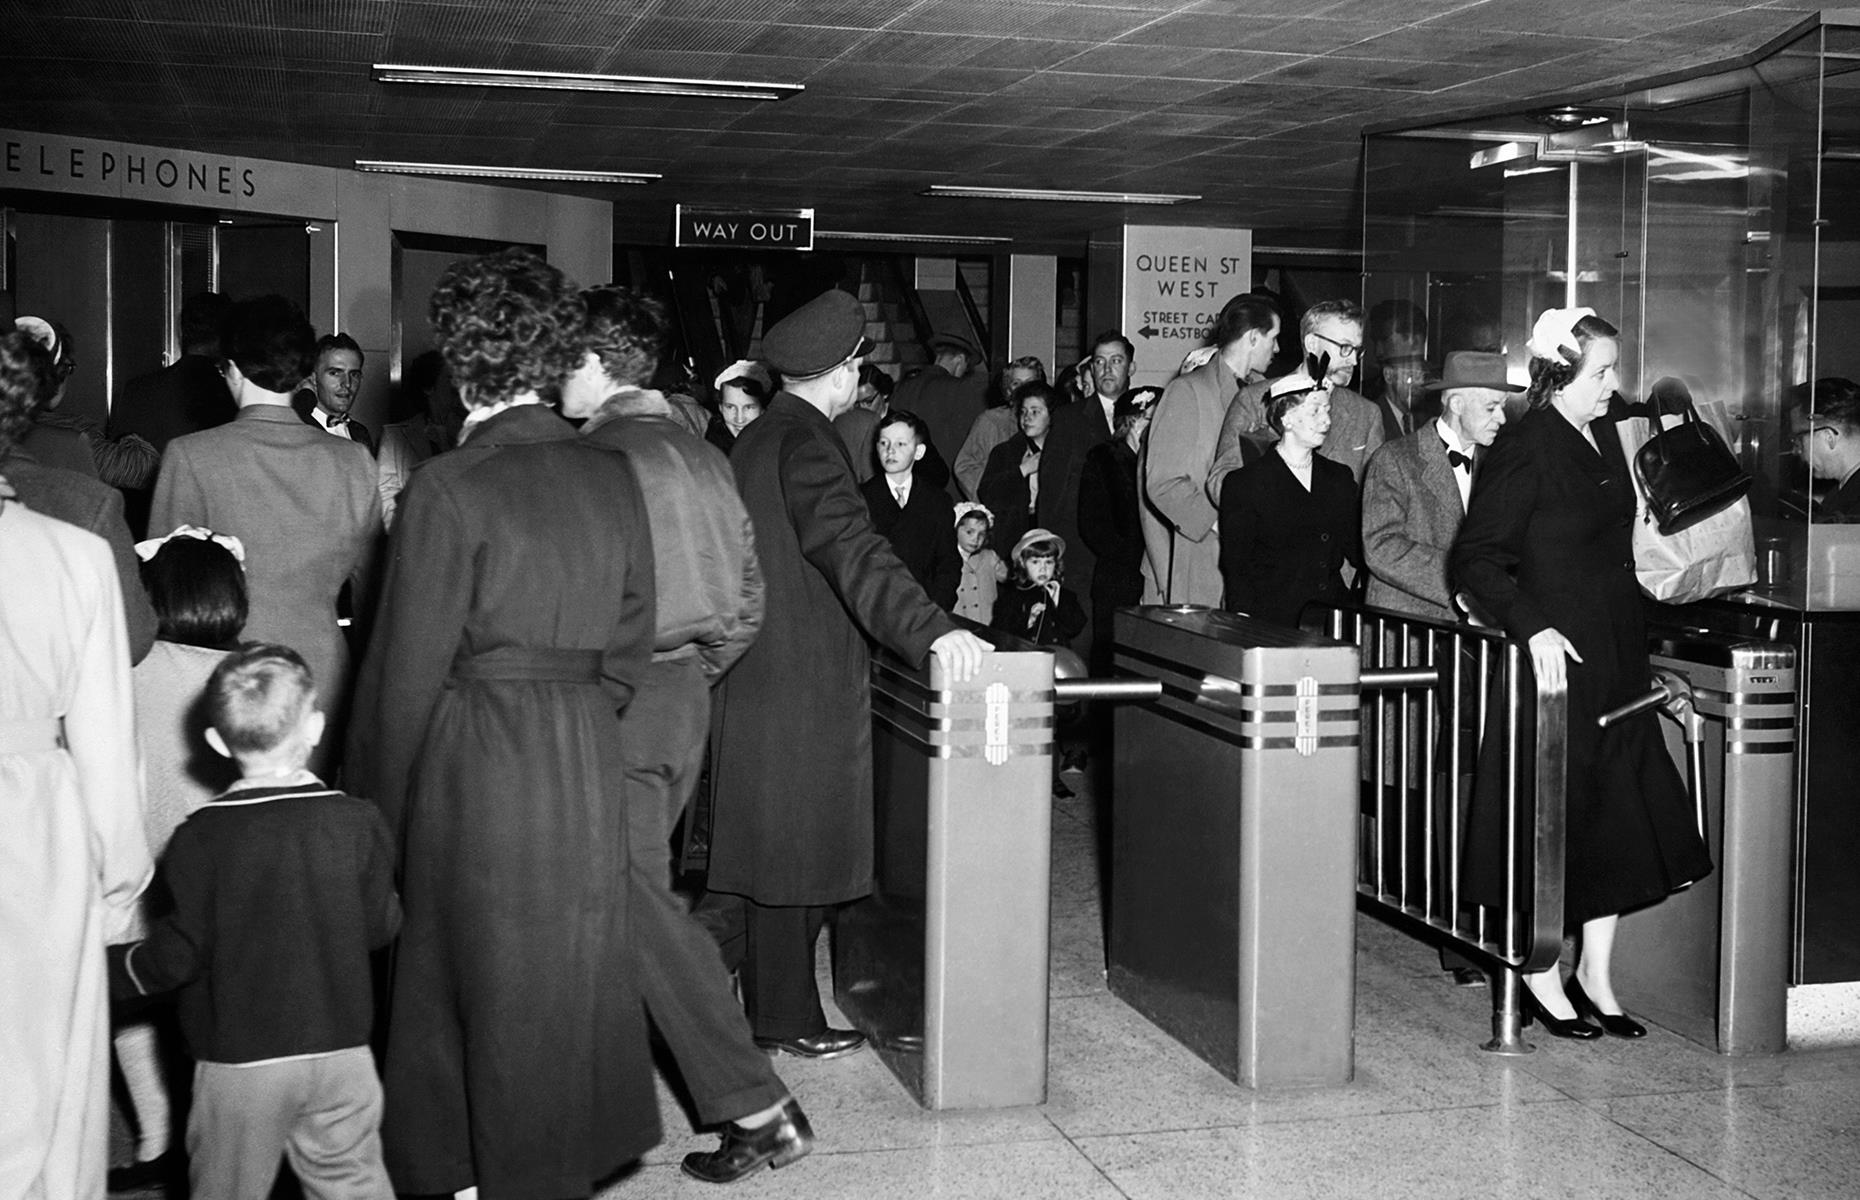 Canada's most populous city followed in the tracks of its North American sisters when its subway launched in 1954. This photo dates to 1957 and shows a busy scene at the city's Queen Street station, as passengers pass through the turnstiles.